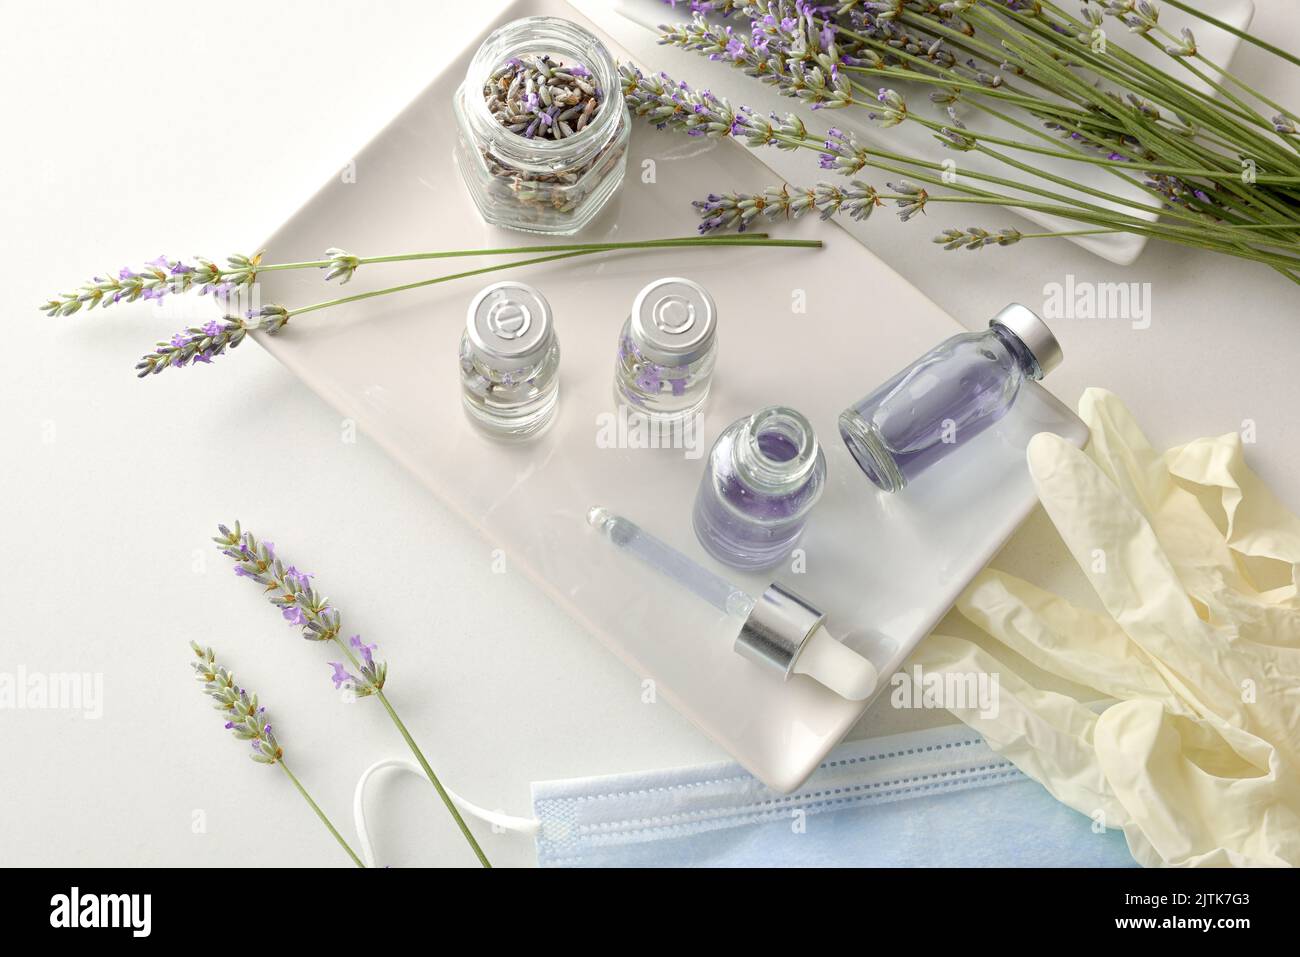 Bottles with treatment prepared from natural lavender plants on a plate on a white bench with plants and elements of protection and personal hygiene. Stock Photo